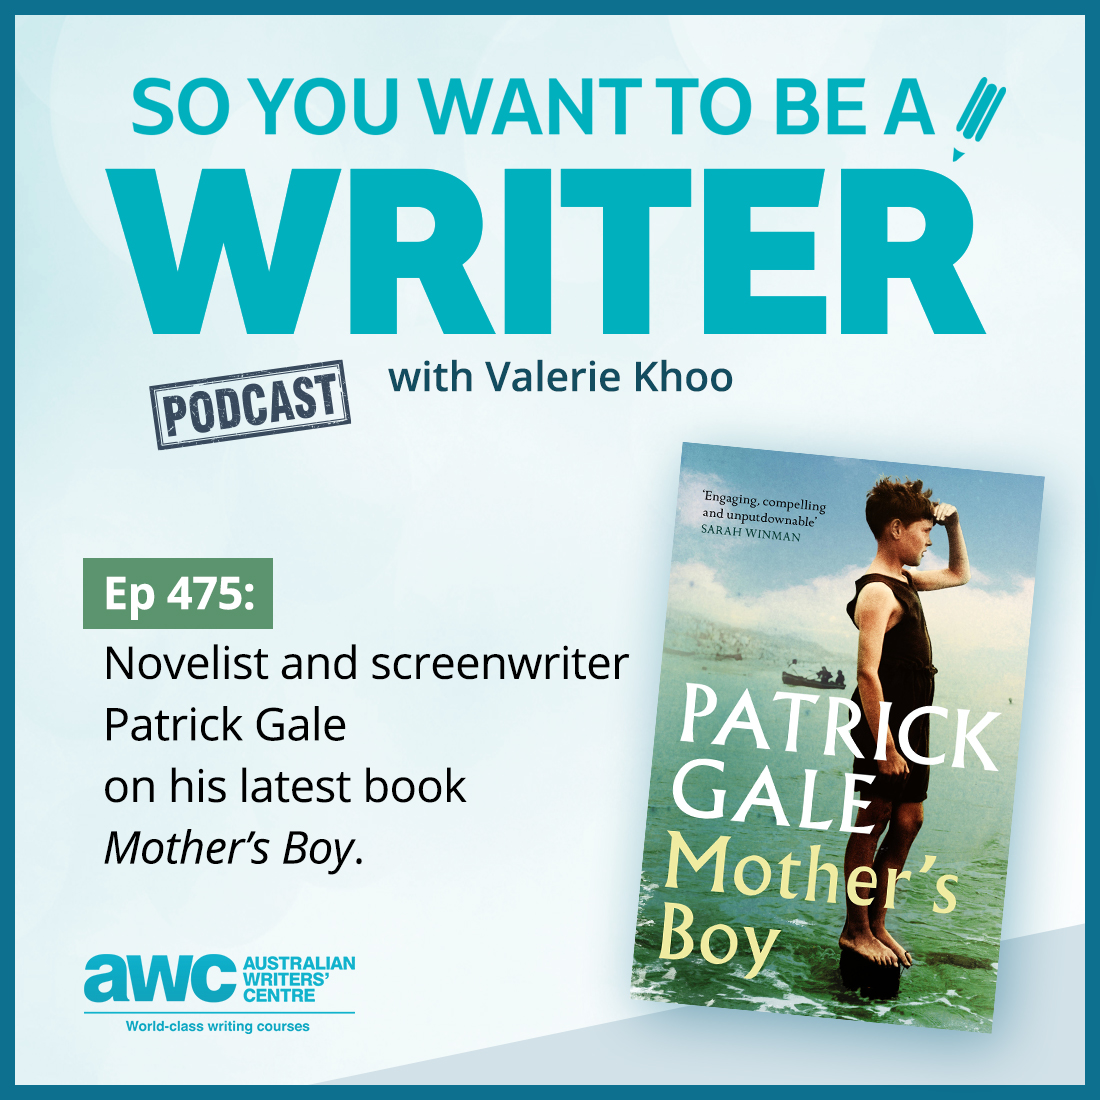 WRITER 475: Novelist and screenwriter Patrick Gale on his latest book 'Mother's Boy'.